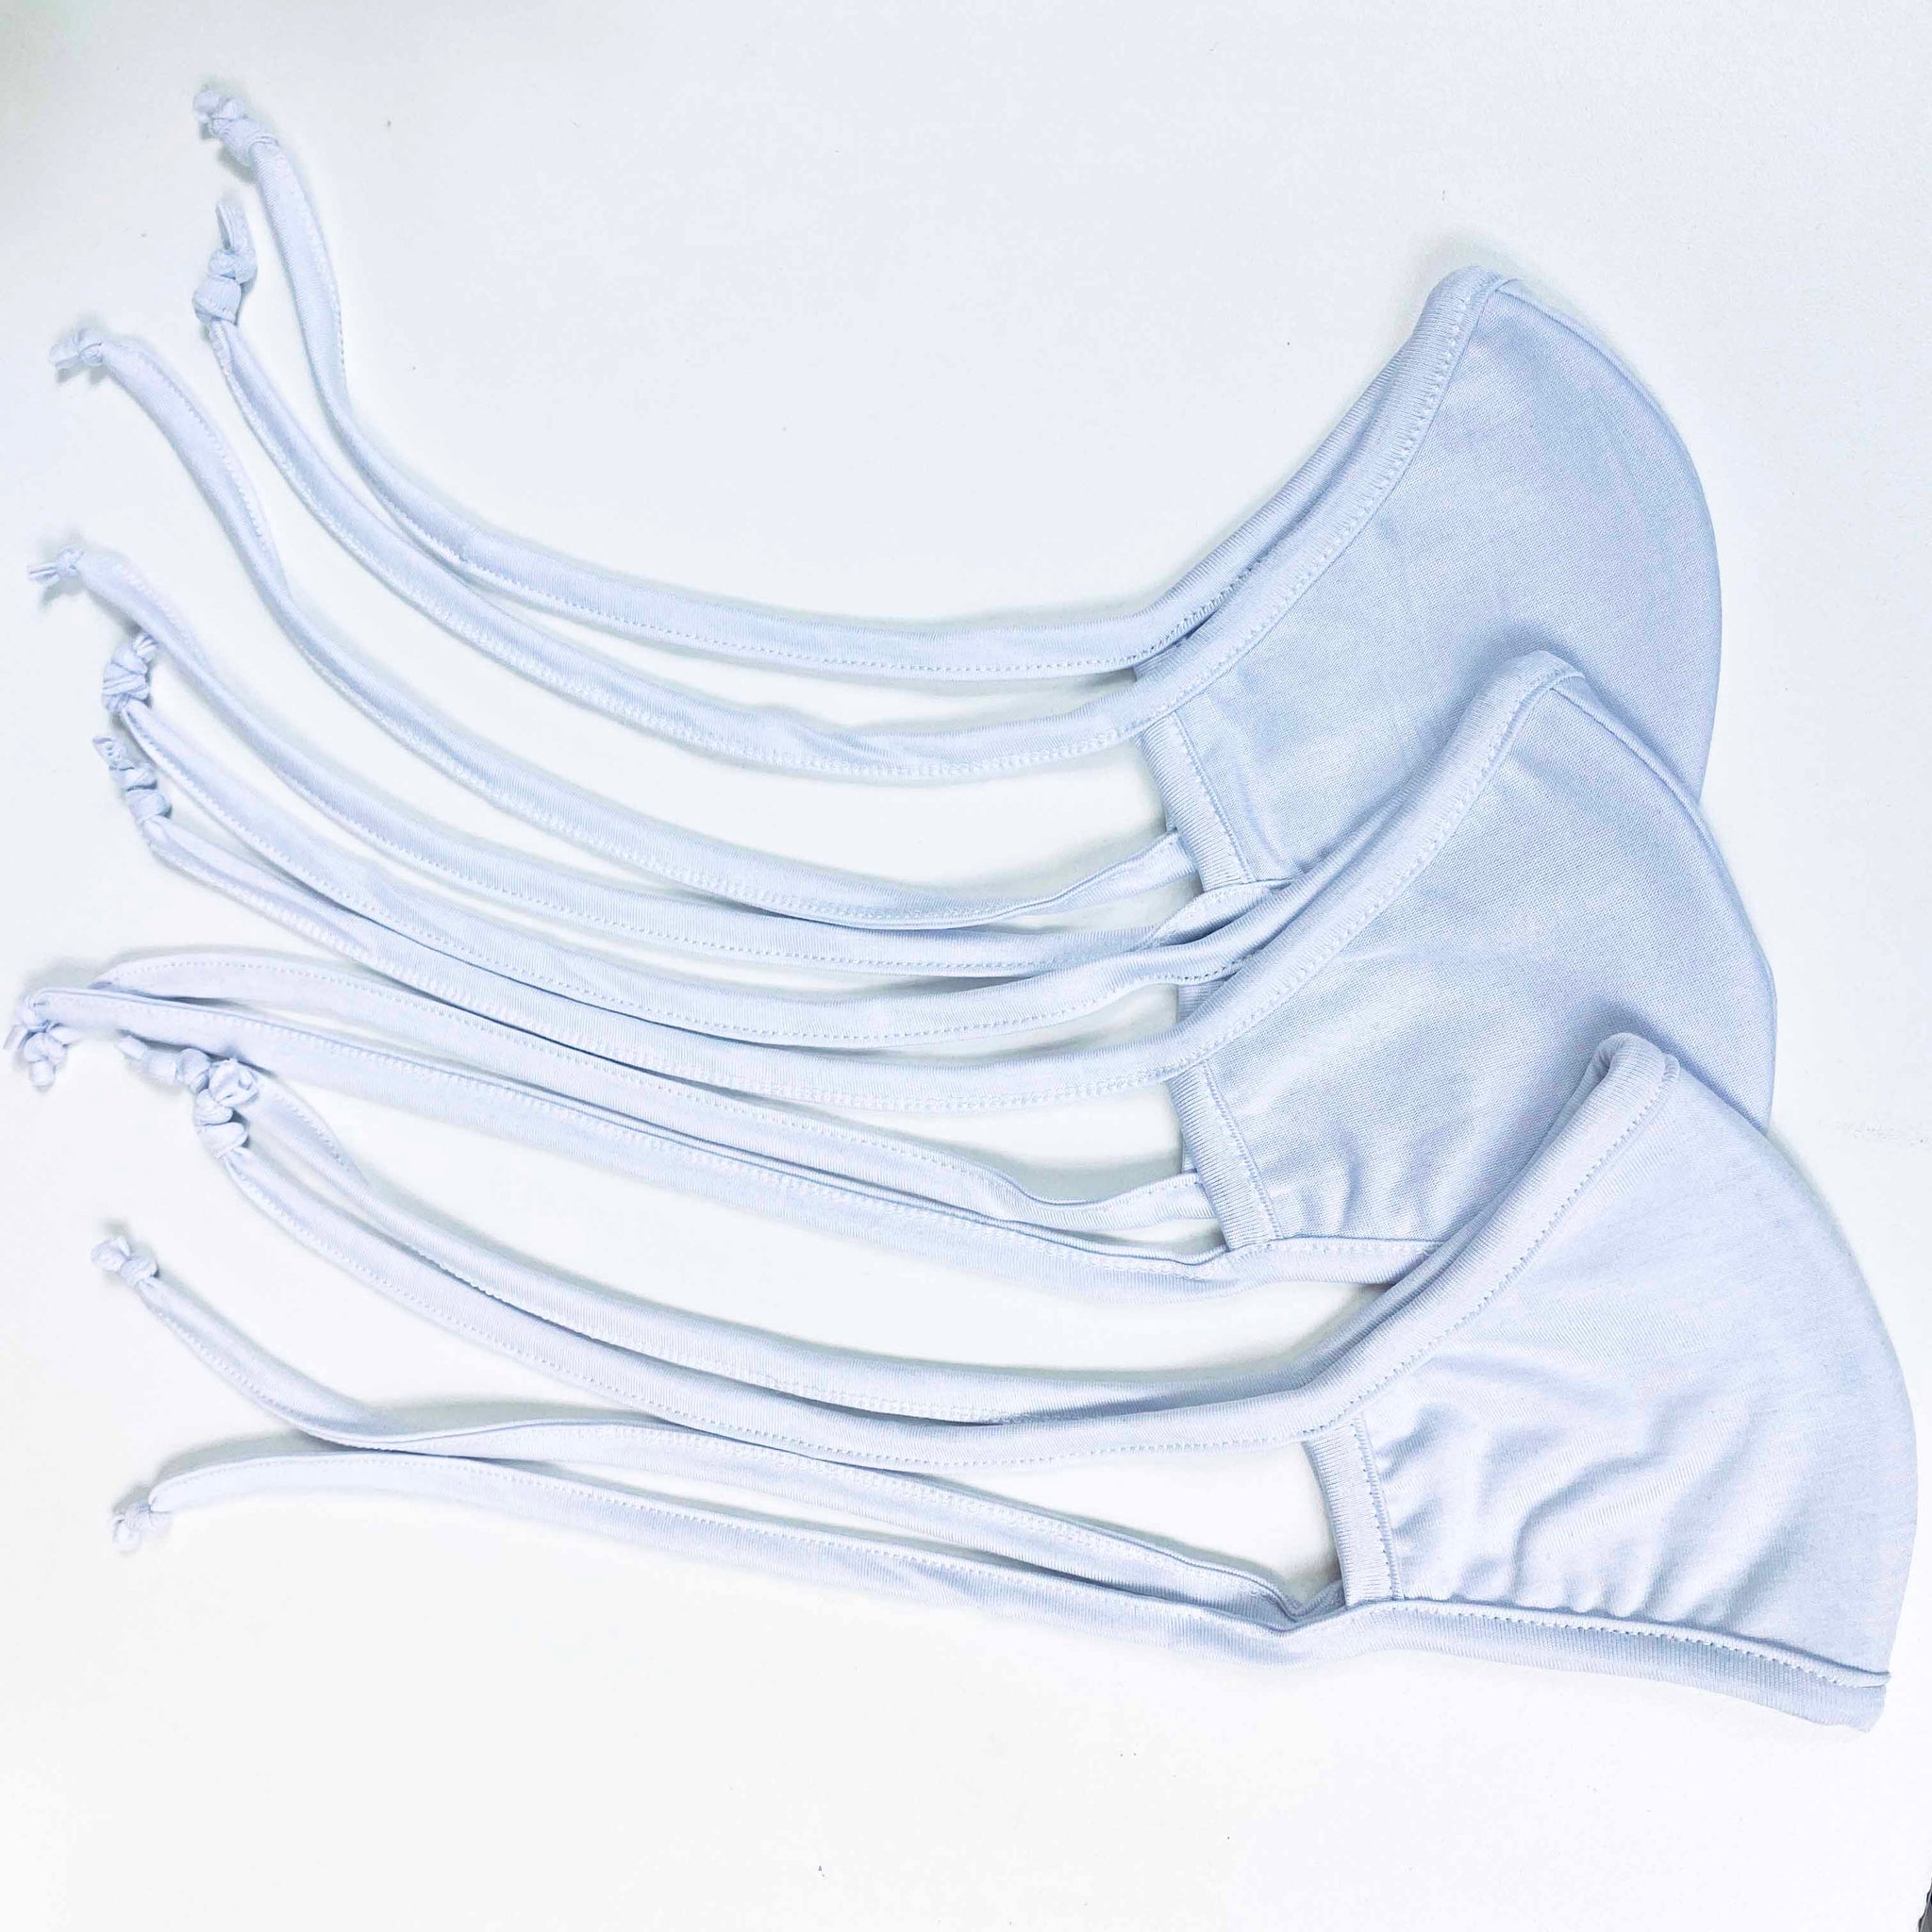 [CLEARANCE] 3 Layer Antibacterial Face Mask - White (S/M)